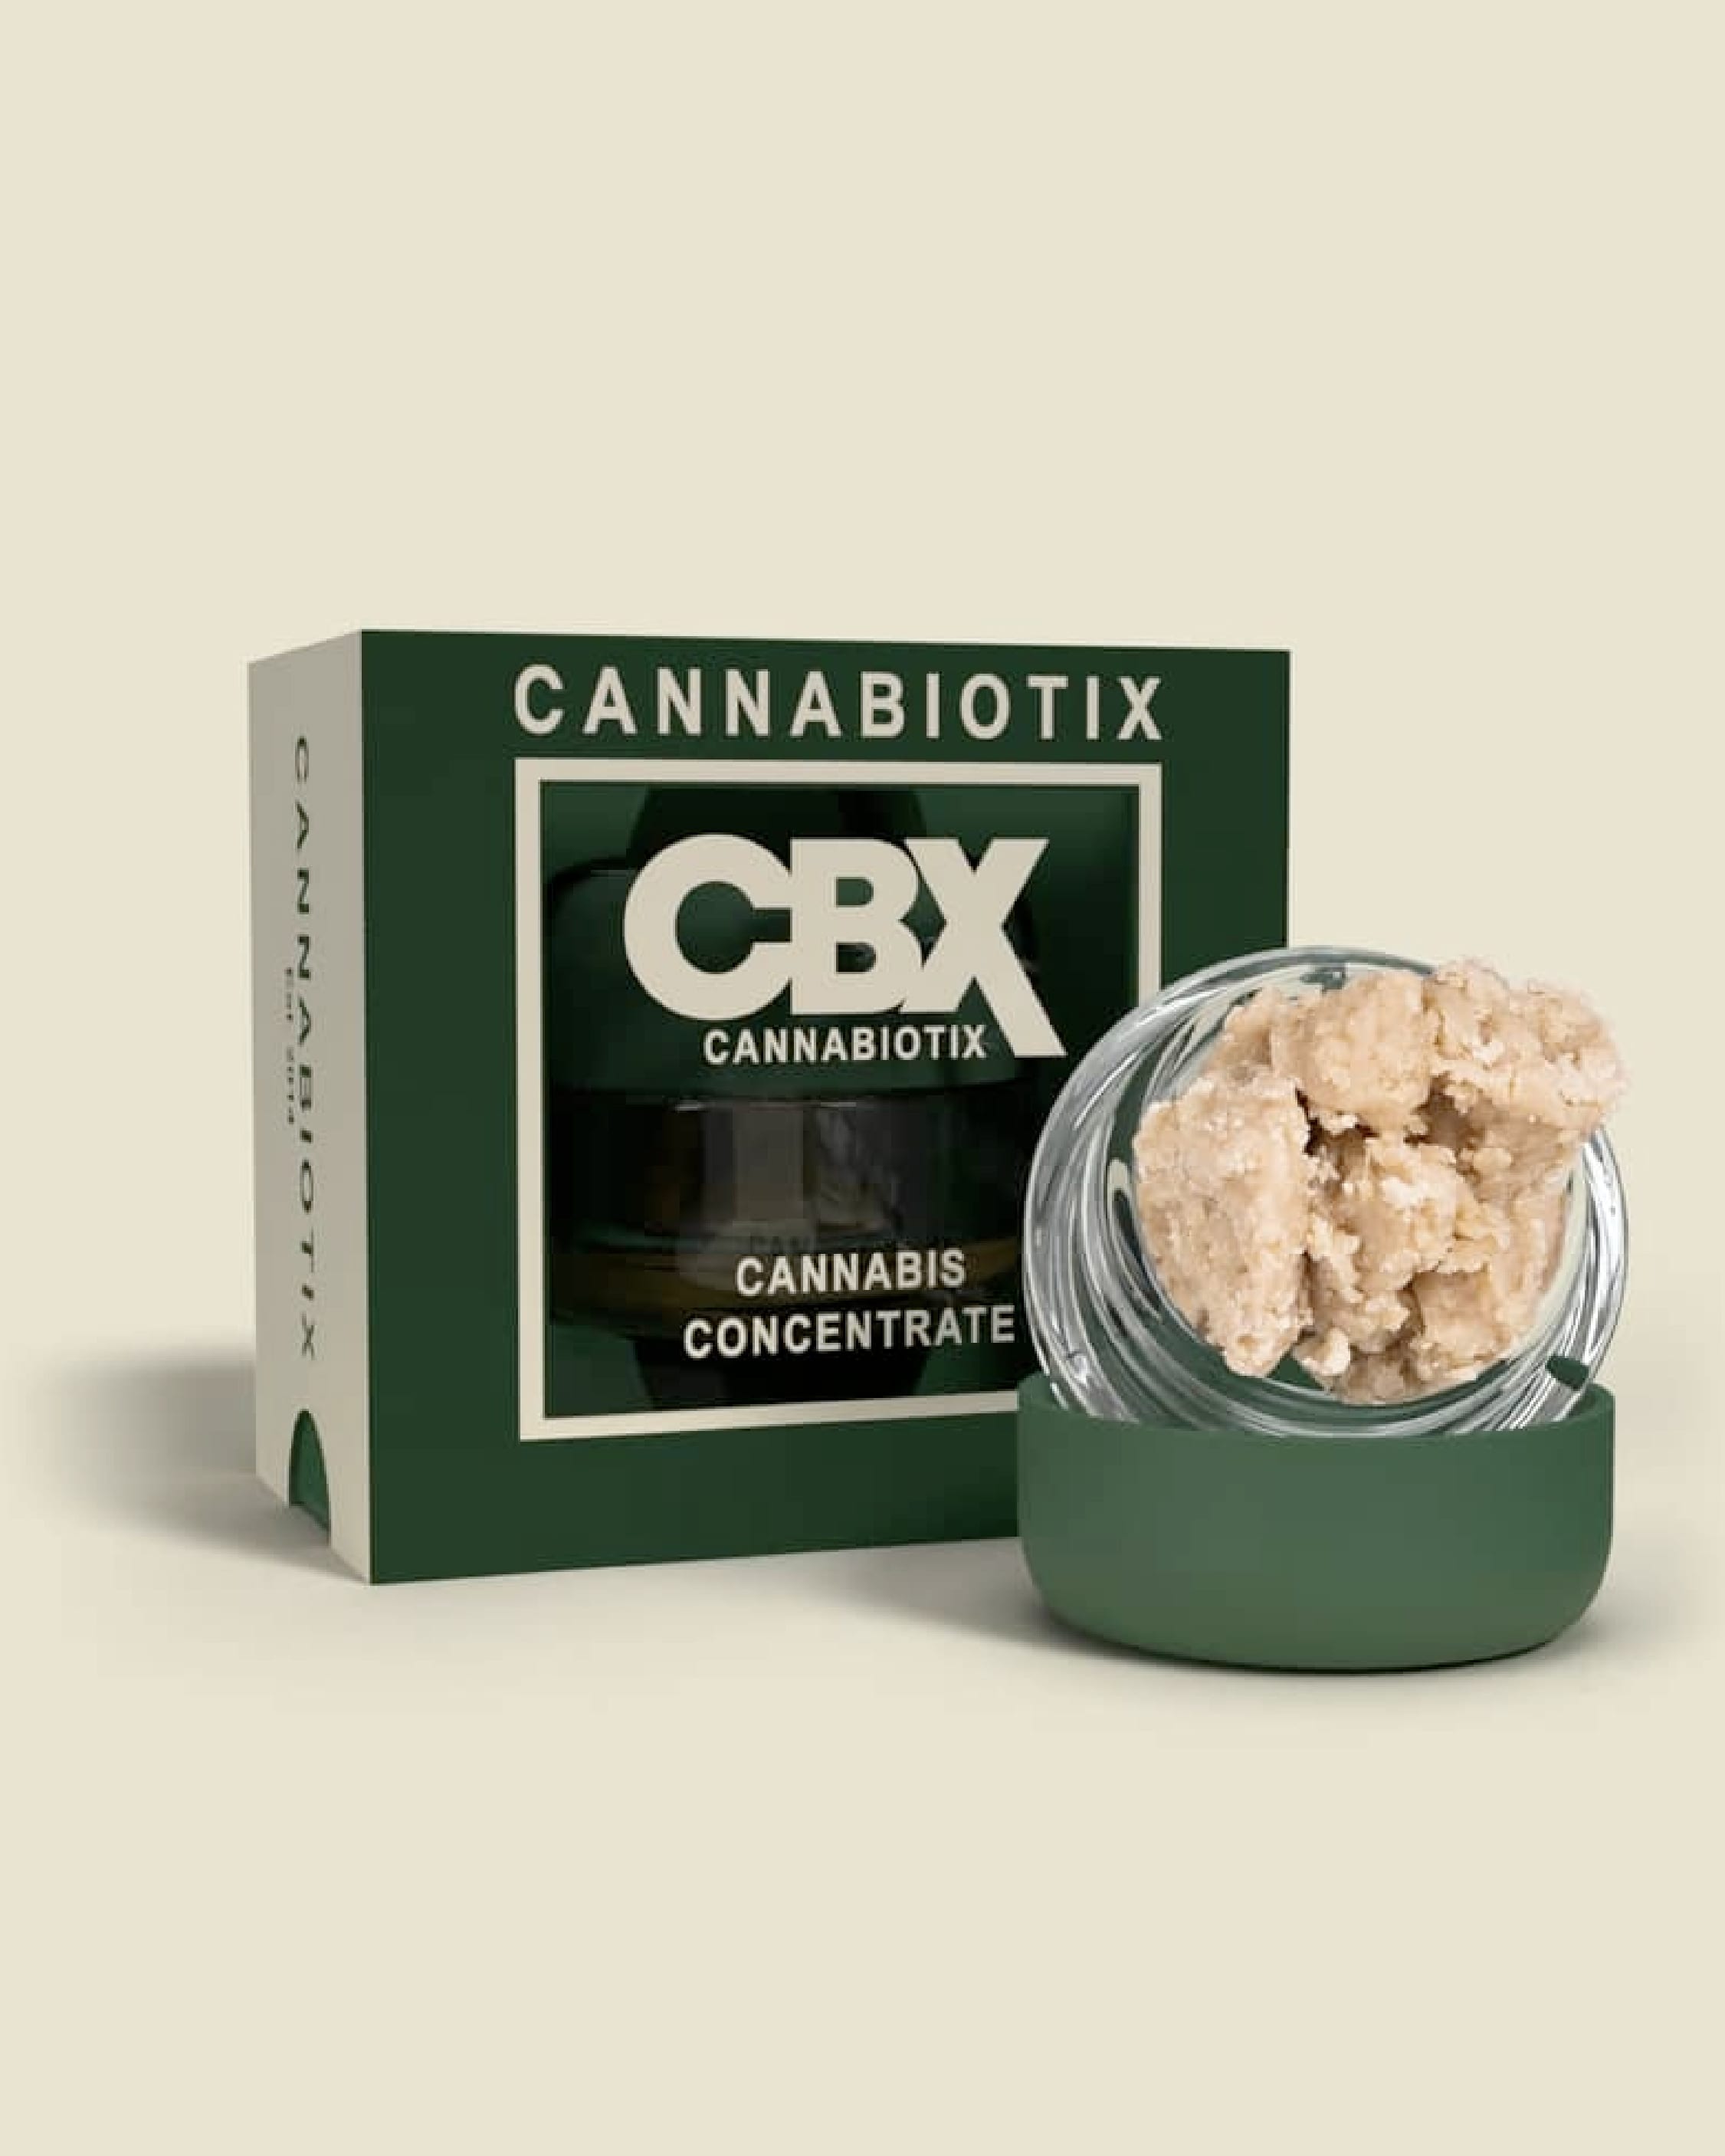 CBX cannabis concentrates, weed shop